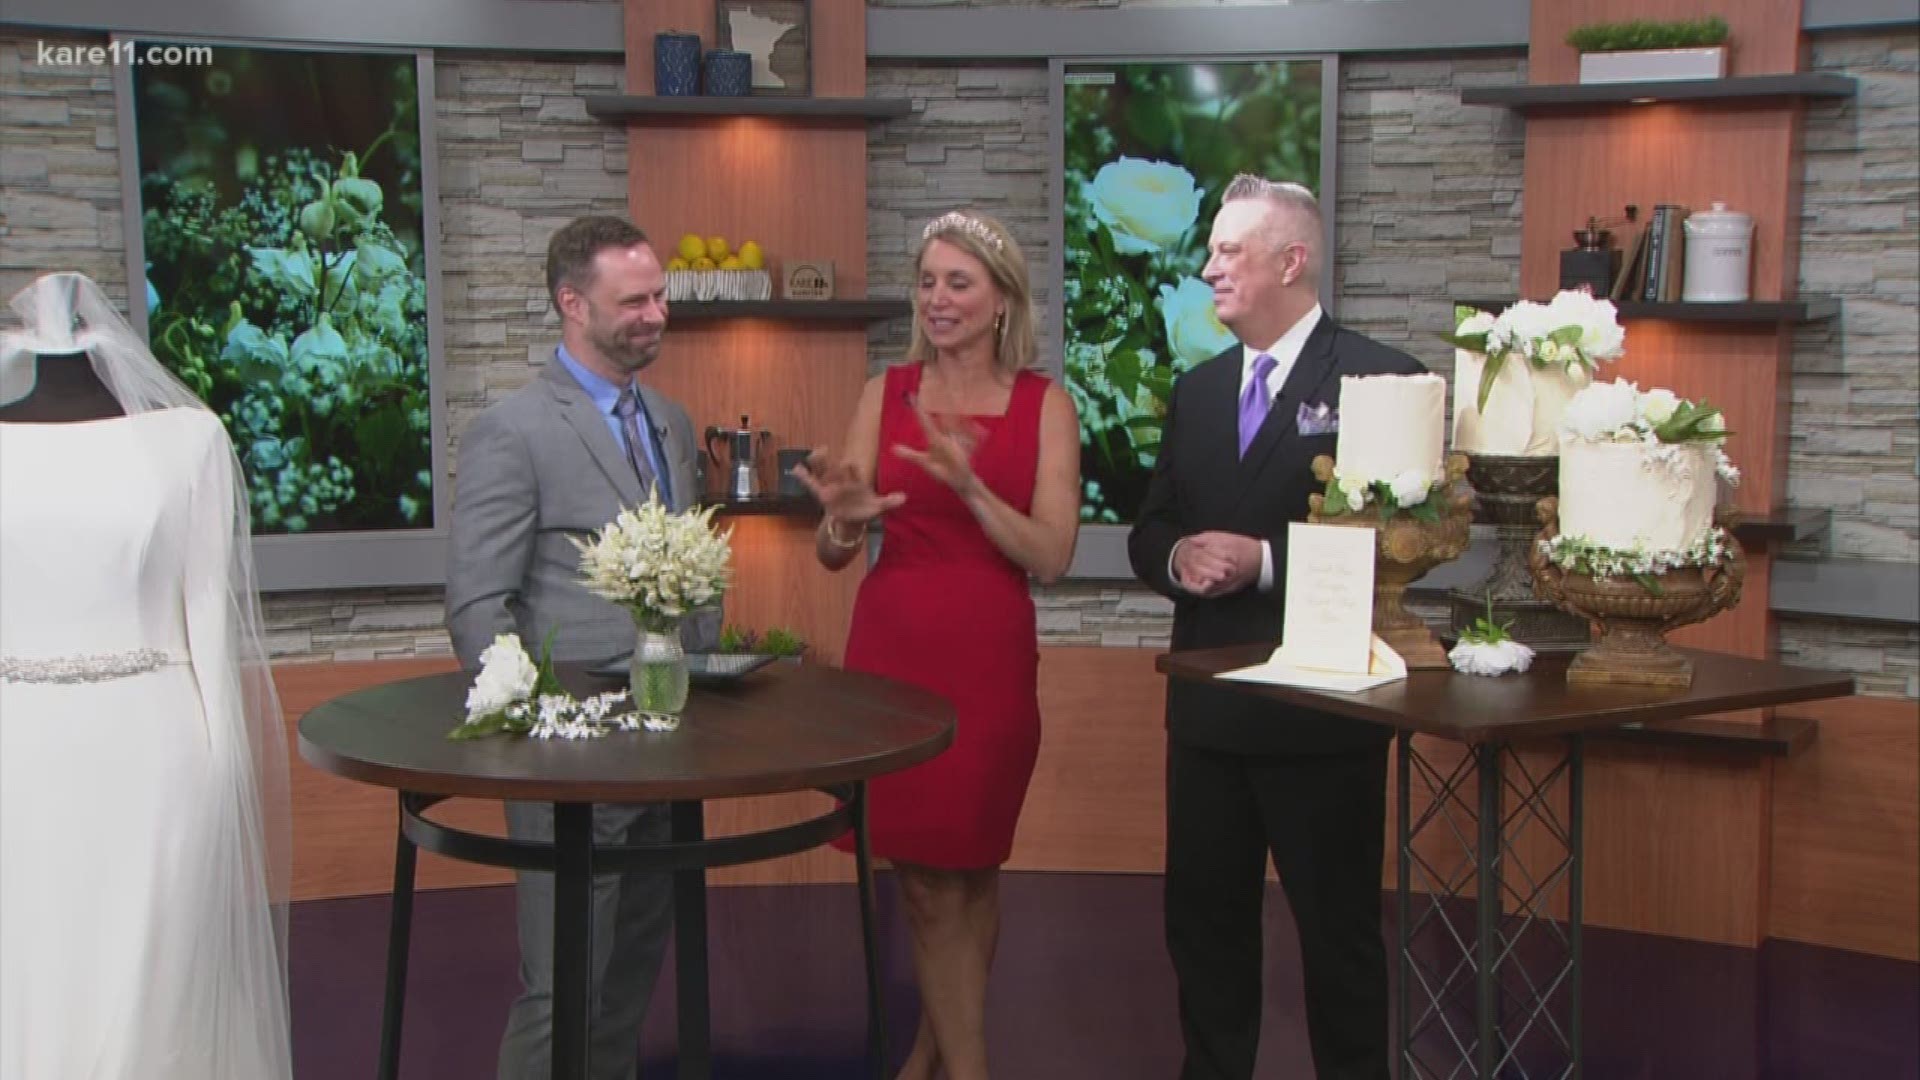 The Wedding Guys joined Belinda Jensen this morning to discuss the royal wedding and current wedding trends.